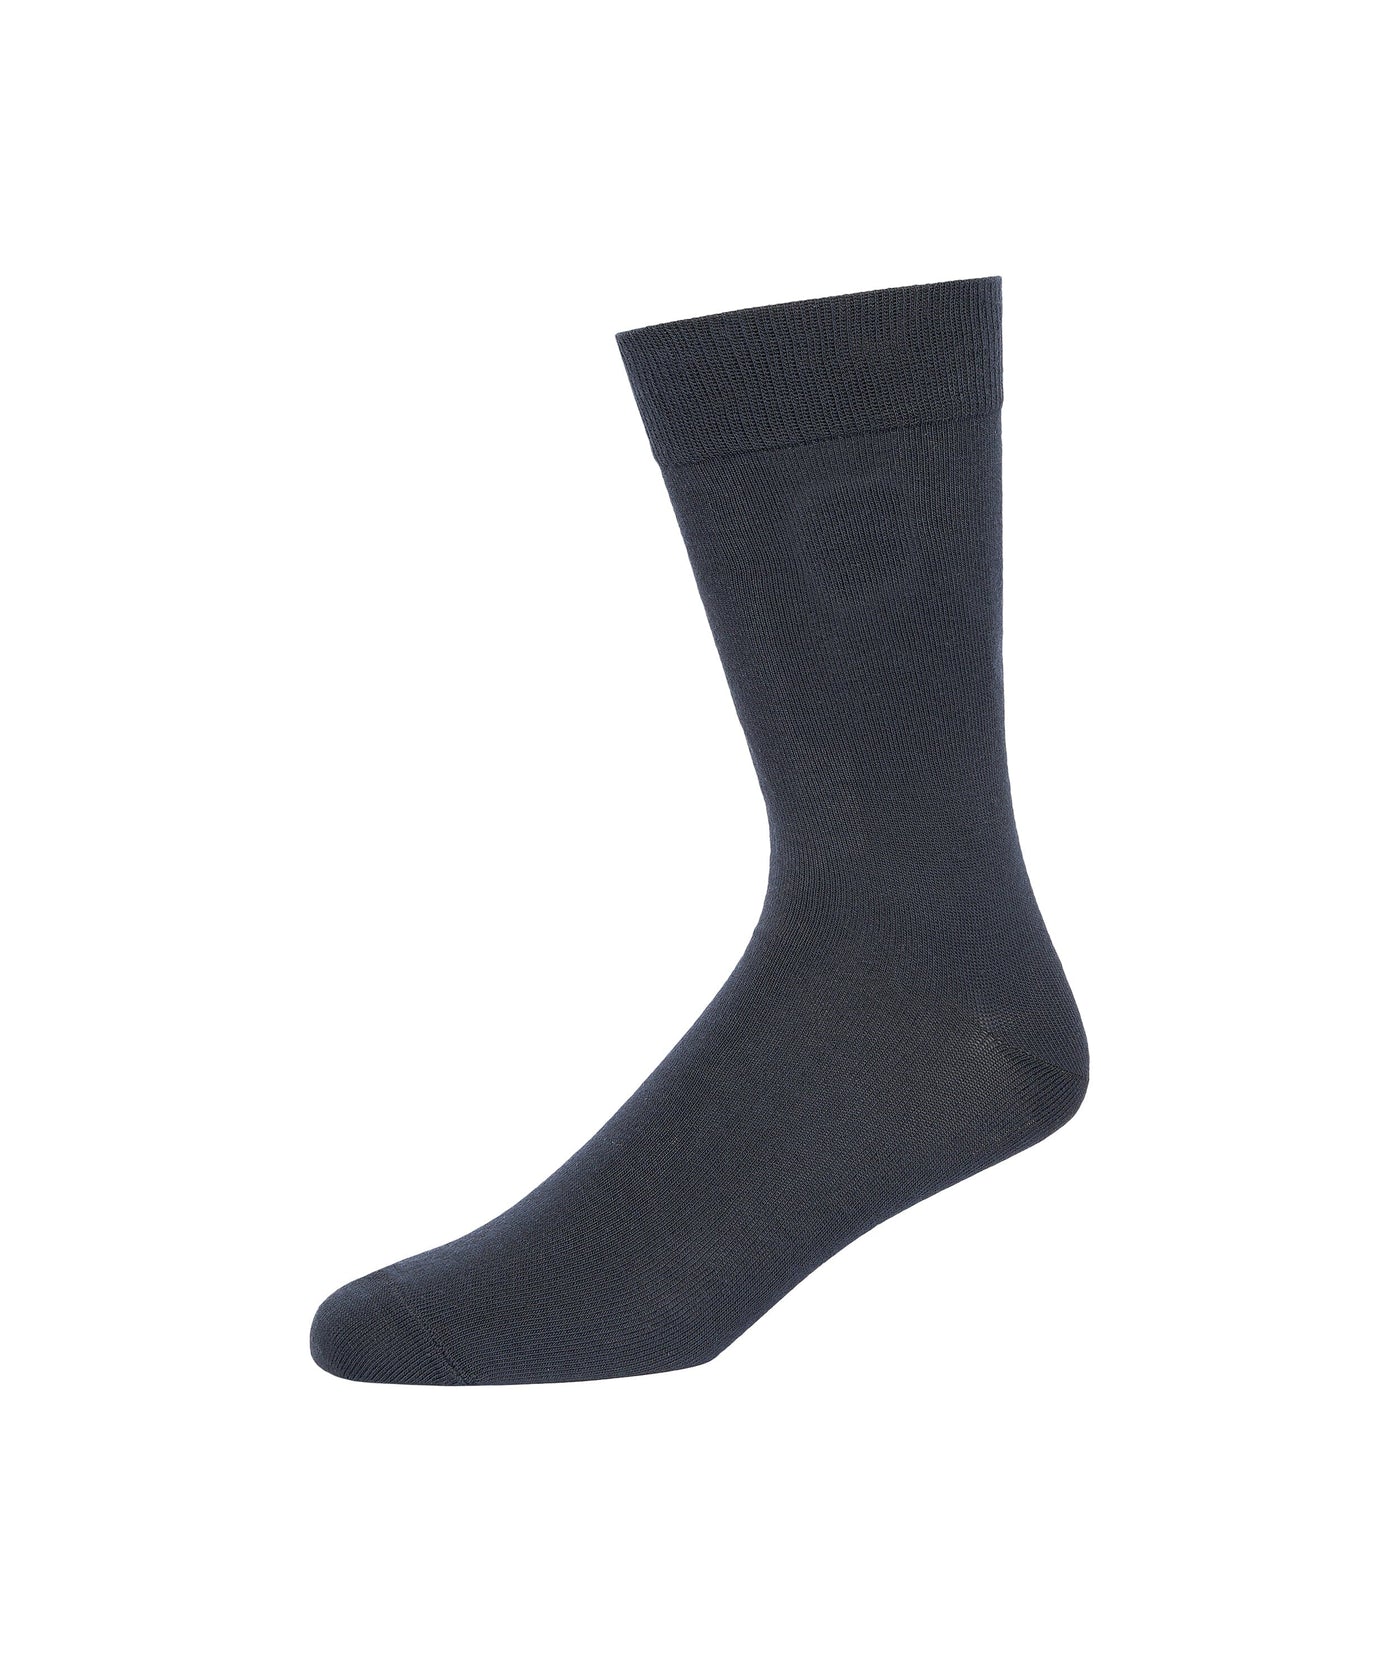 French Connection Stripe Socks 3pk Marine/Charcoal